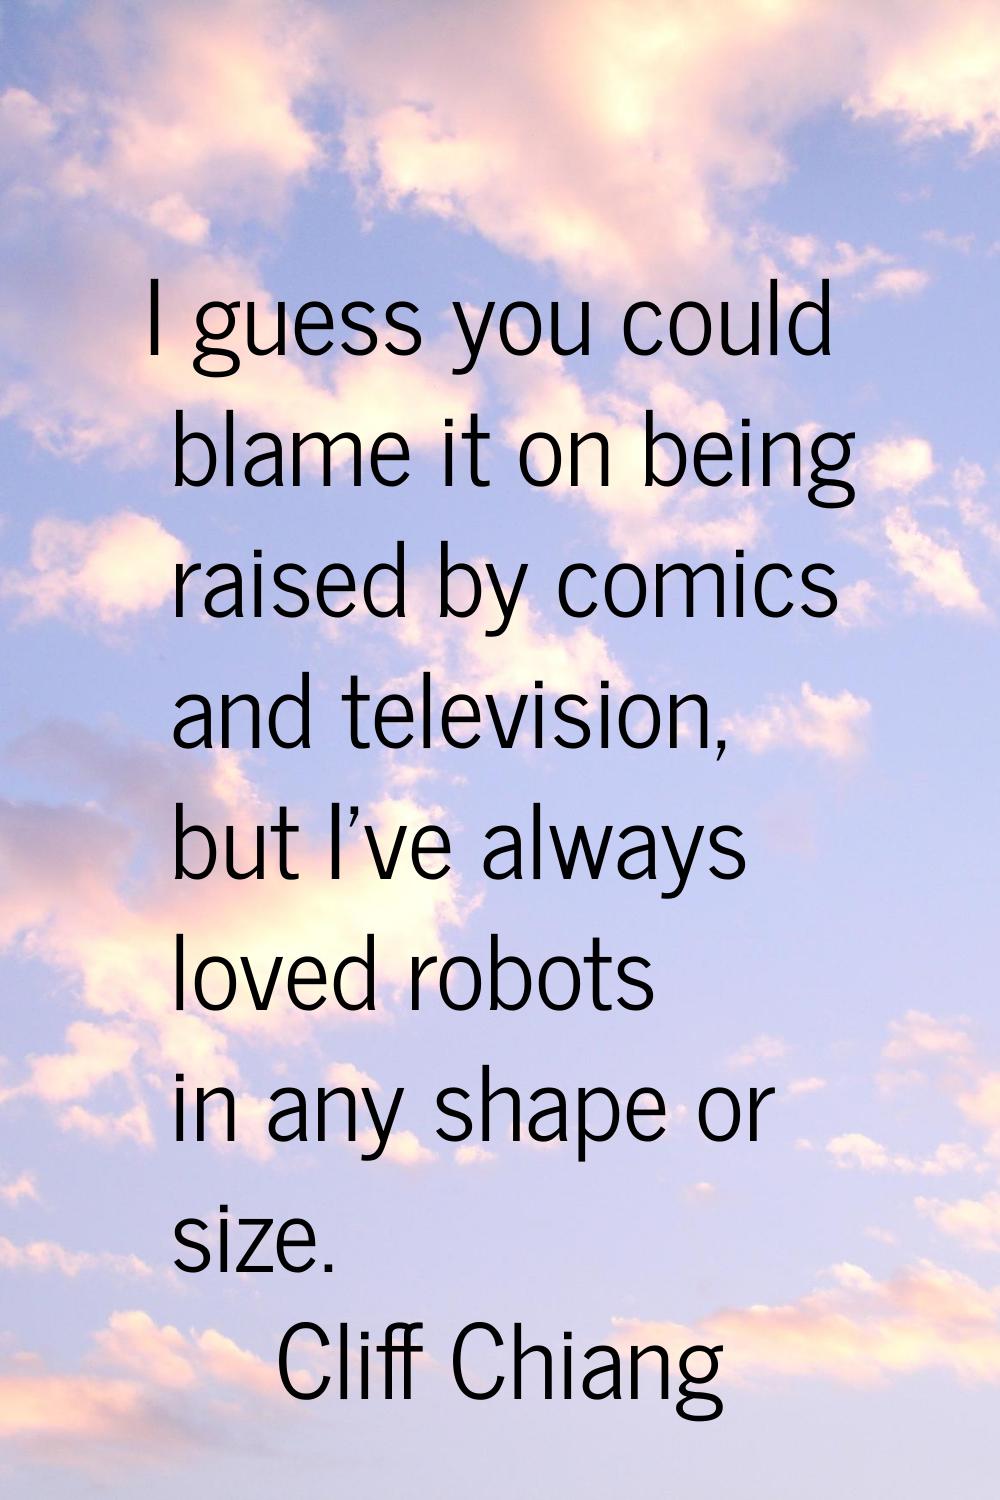 I guess you could blame it on being raised by comics and television, but I've always loved robots i